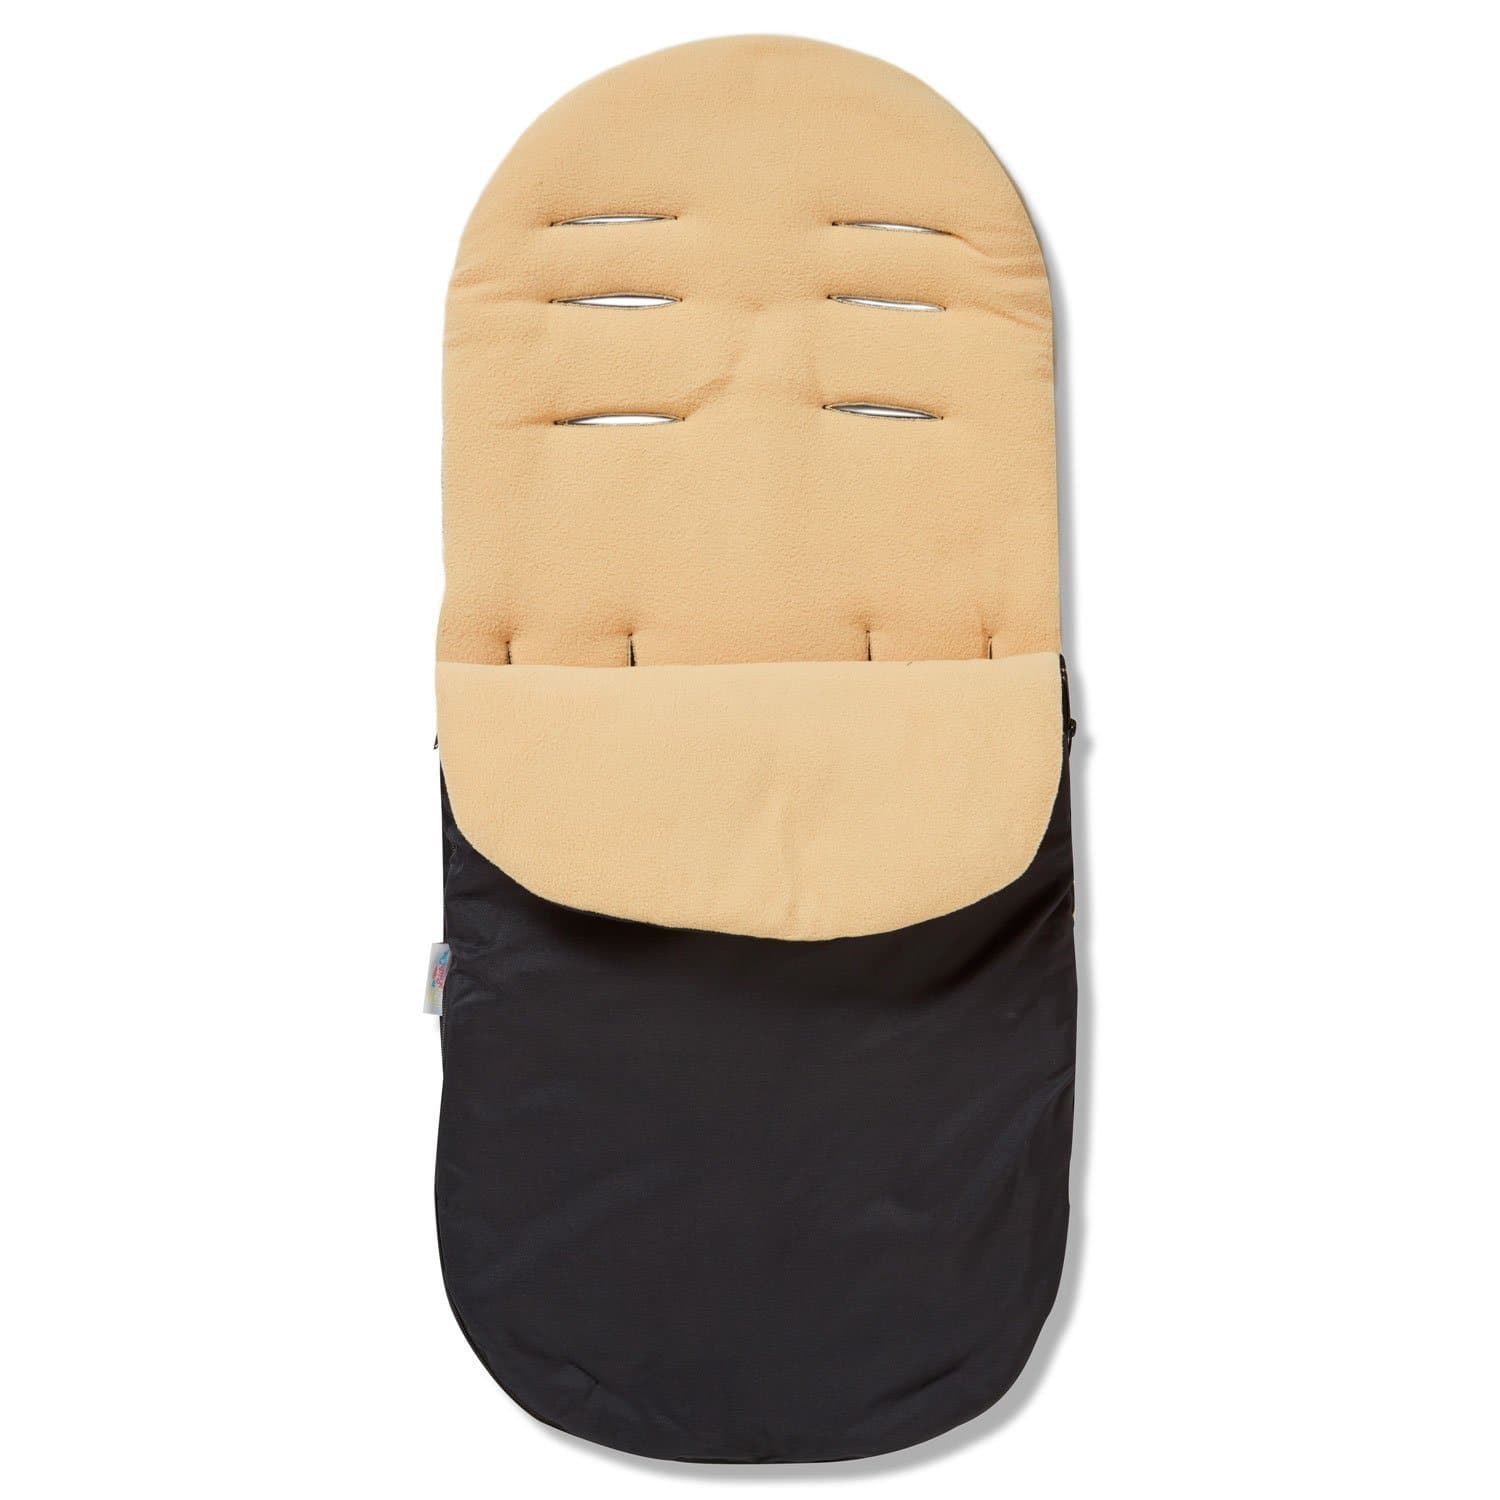 Footmuff / Cosy Toes Compatible with Venicci - Sand / Fits All Models | For Your Little One